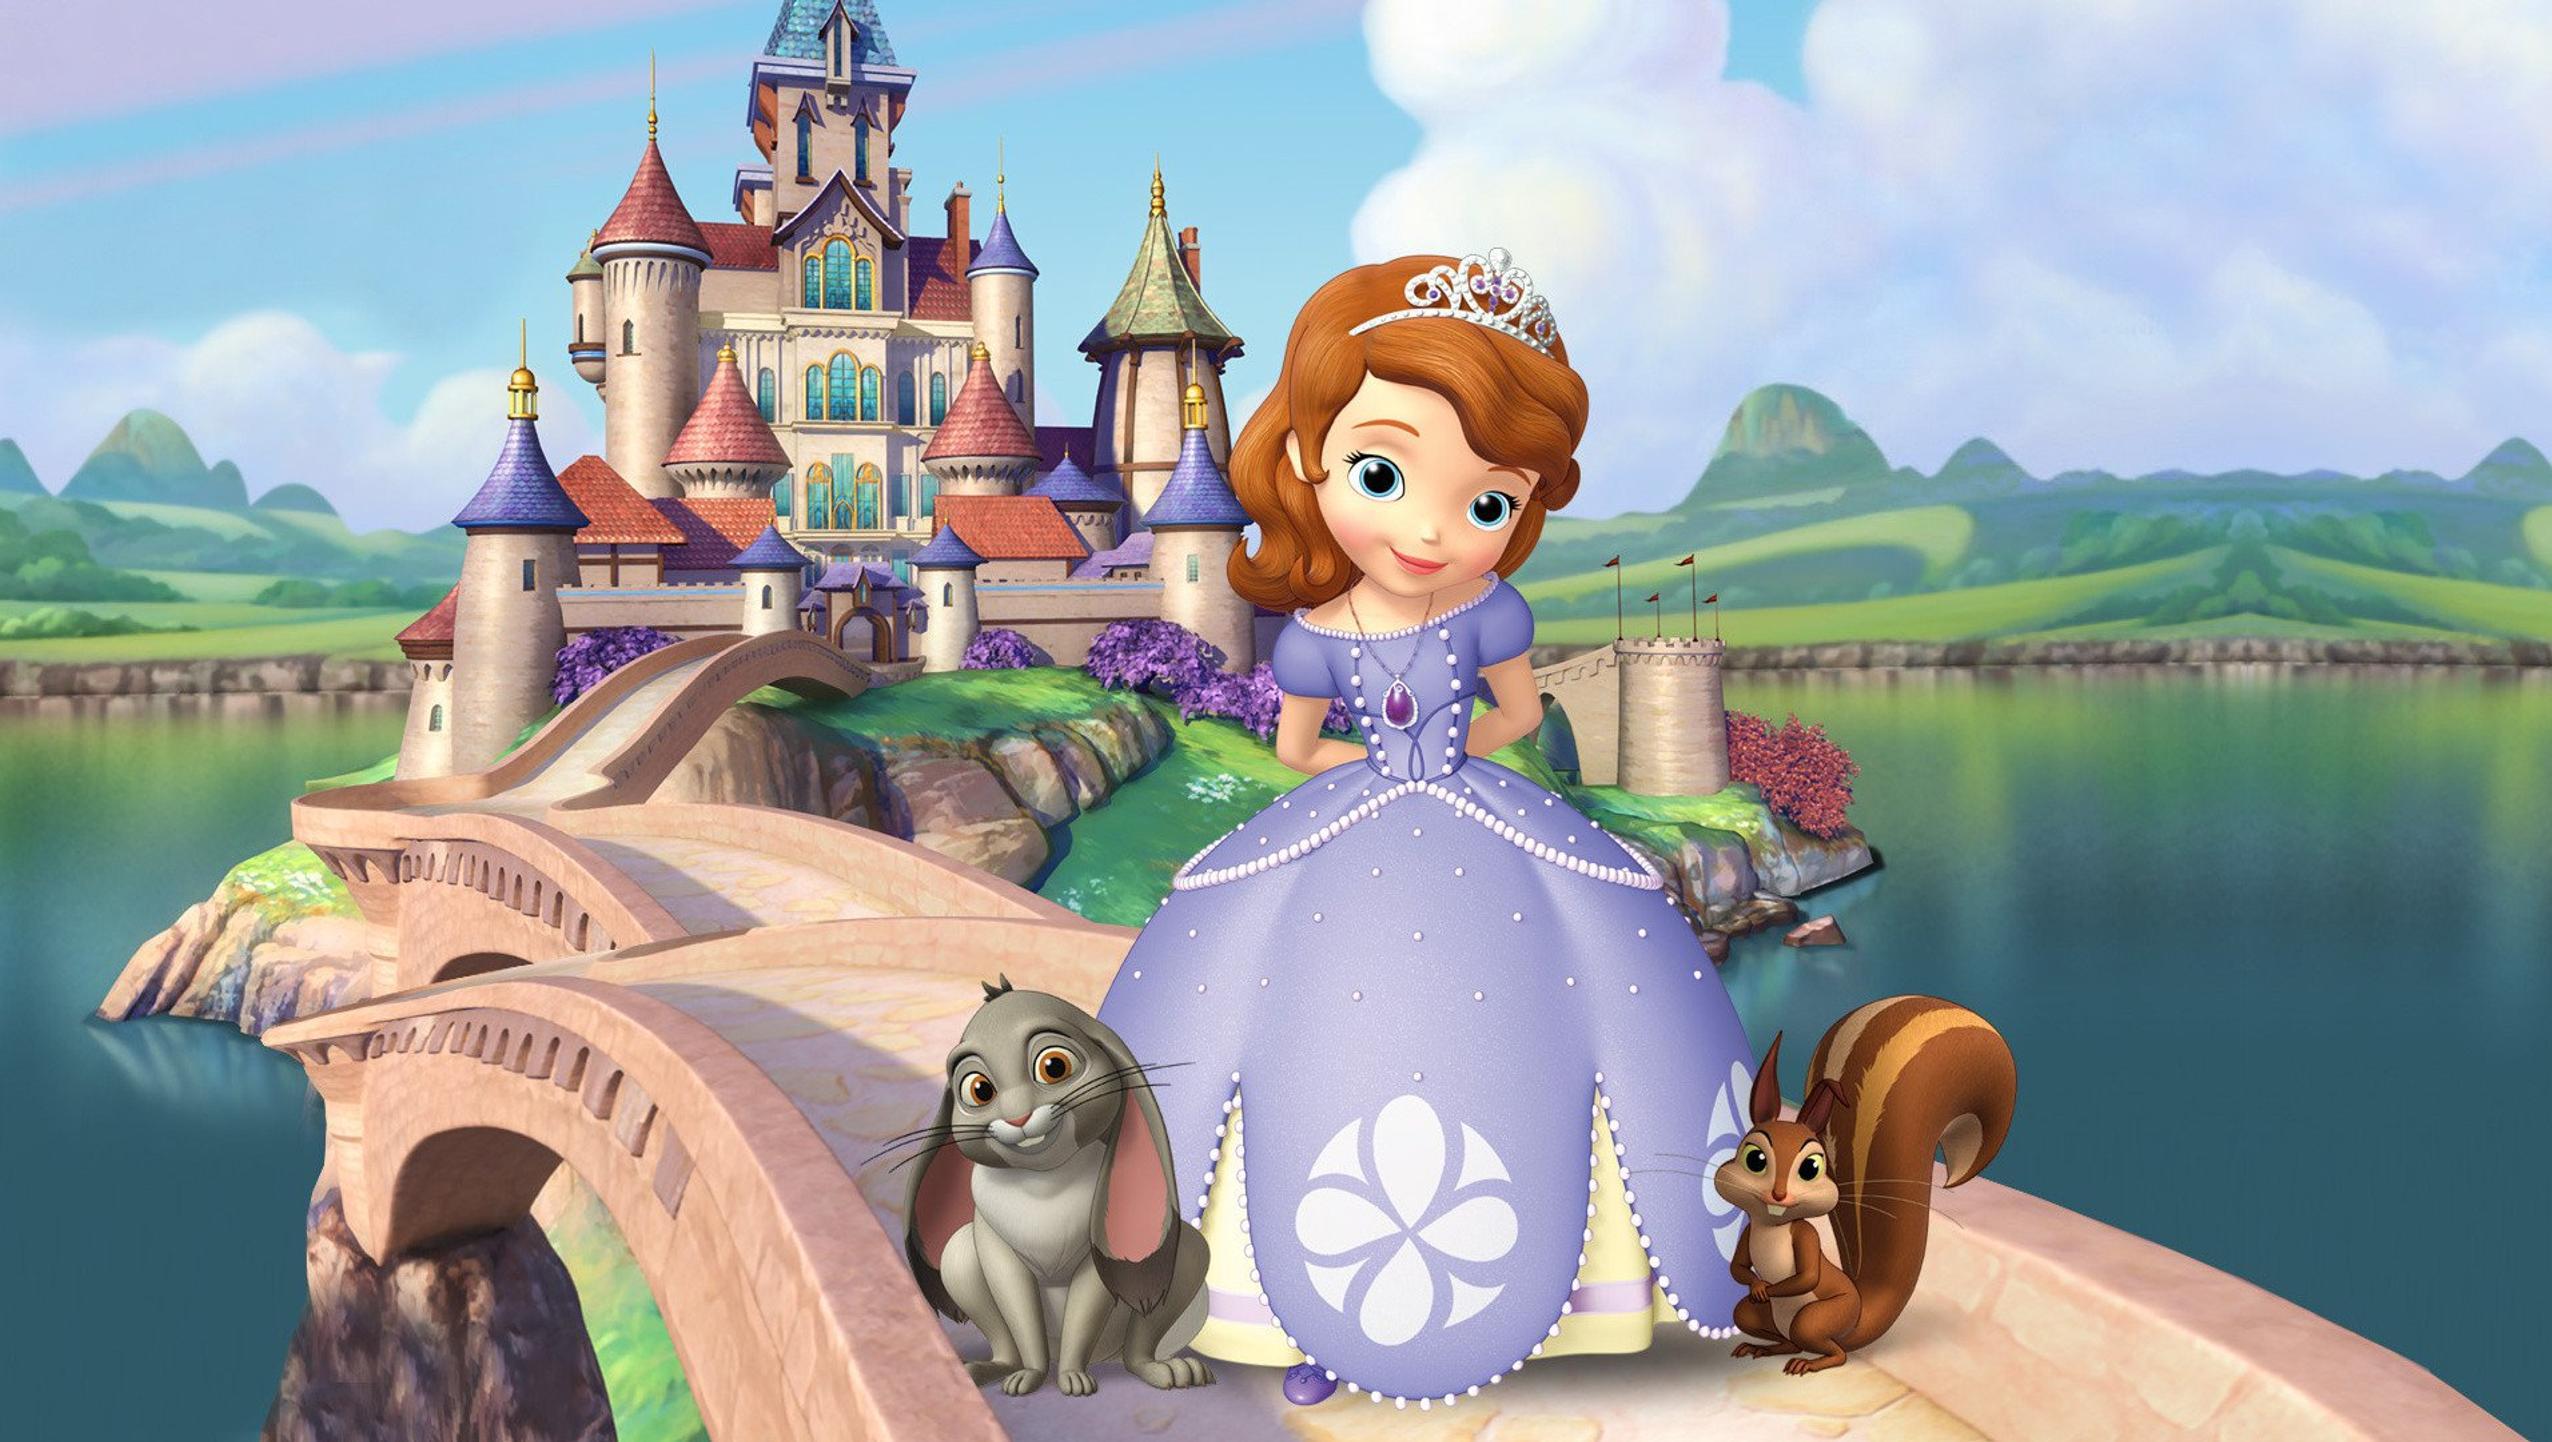 Sofia The First Wallpaper For Laptop